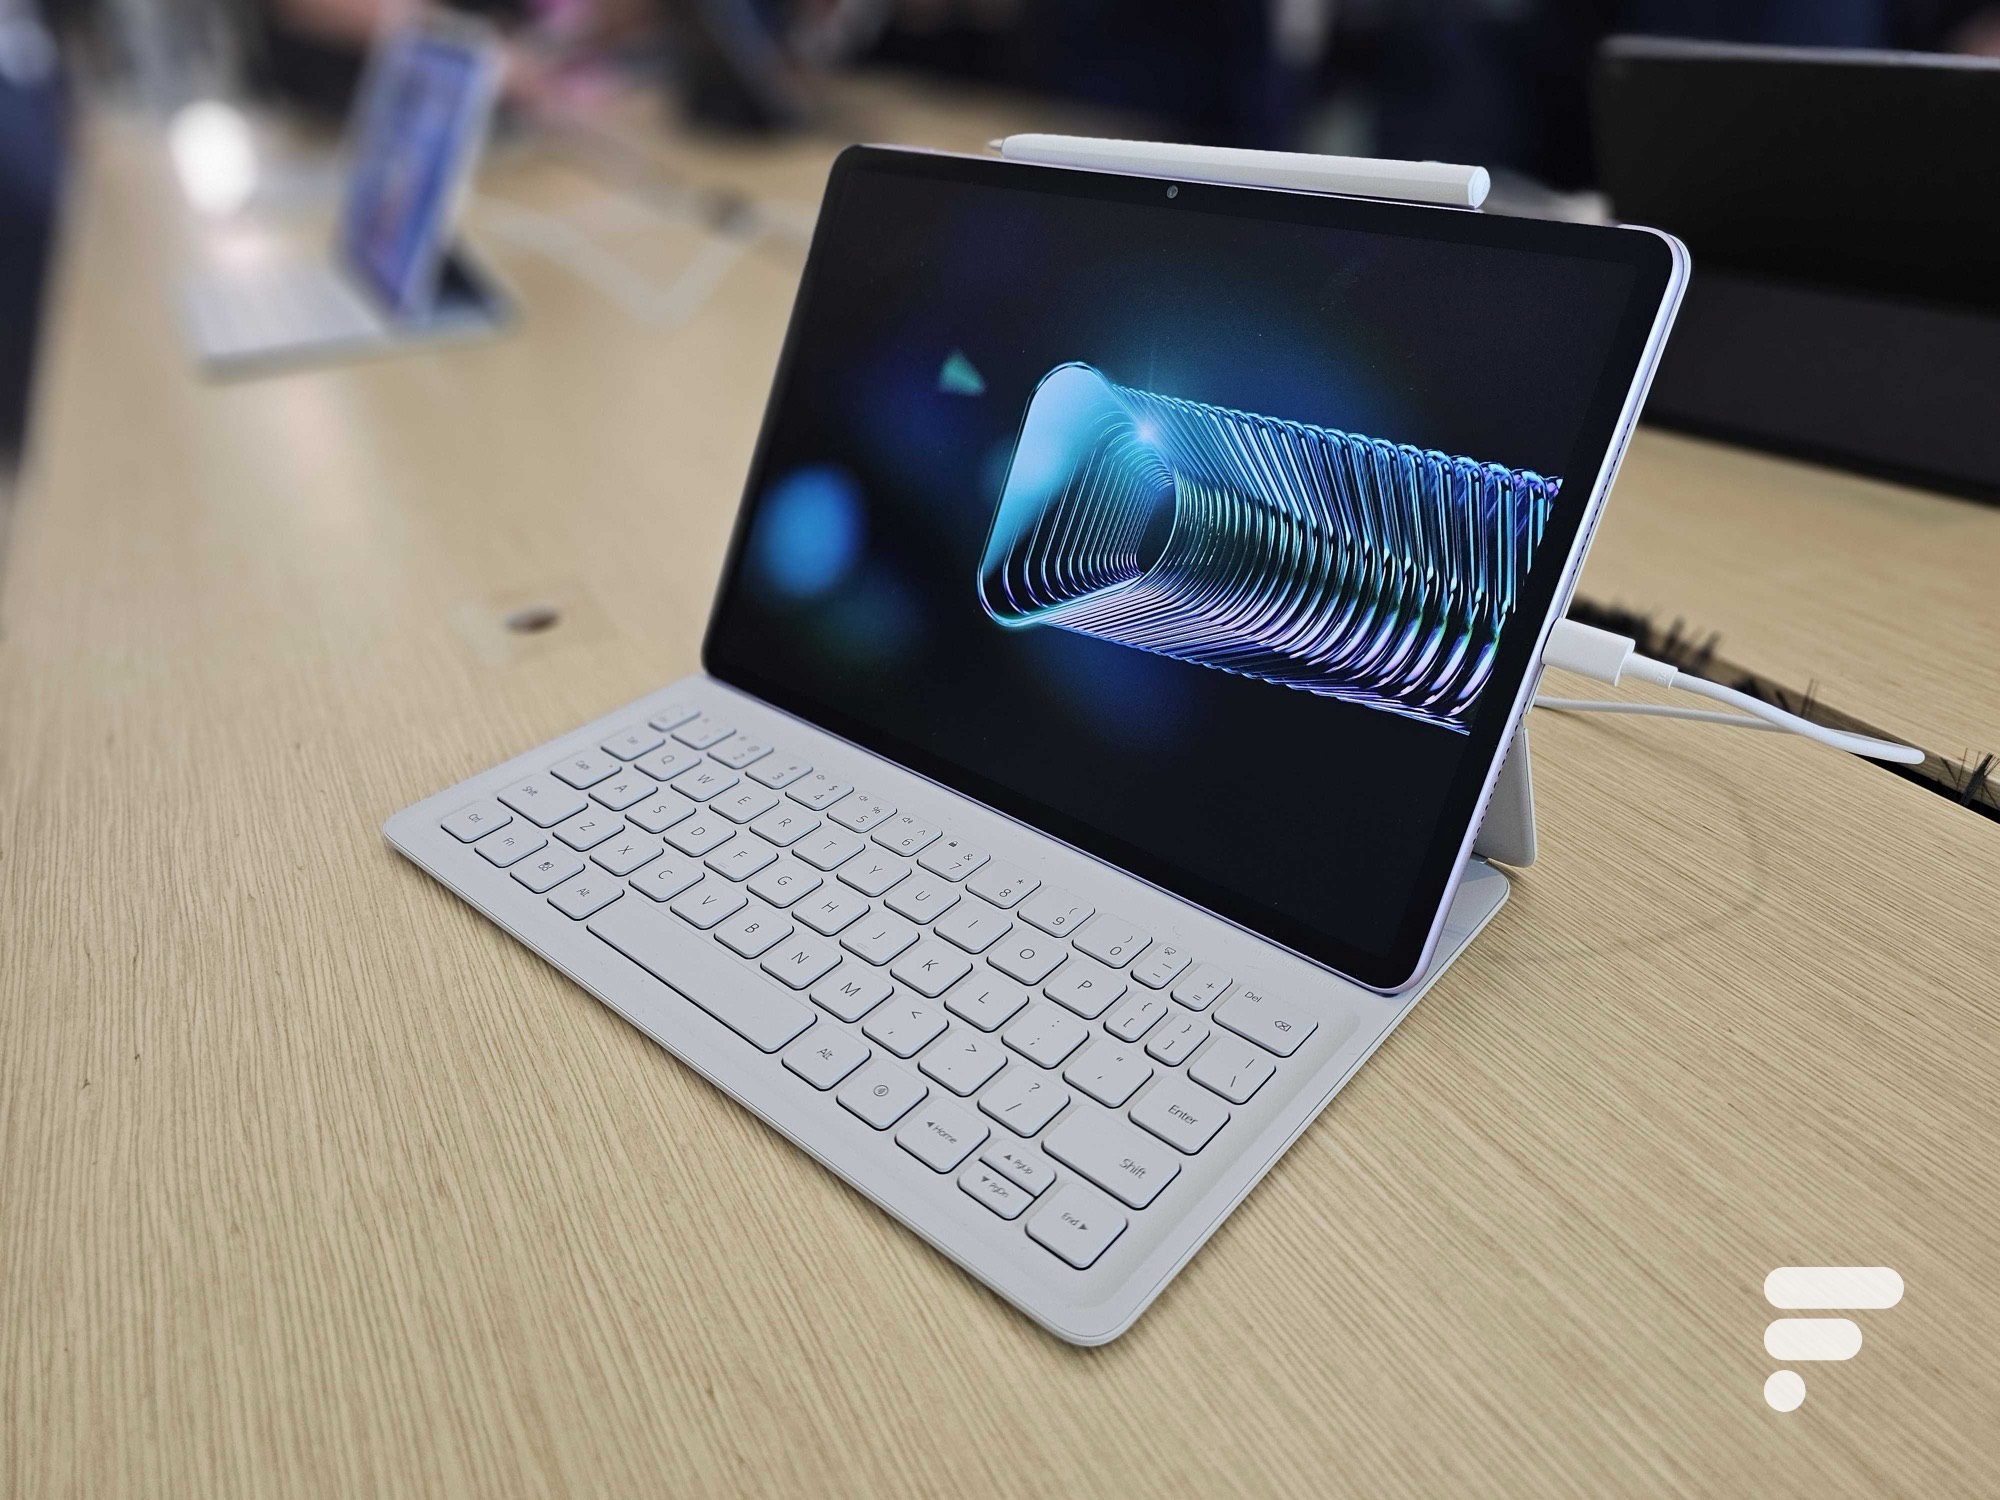 a serious competitor to the throne dominated by the iPad Pro